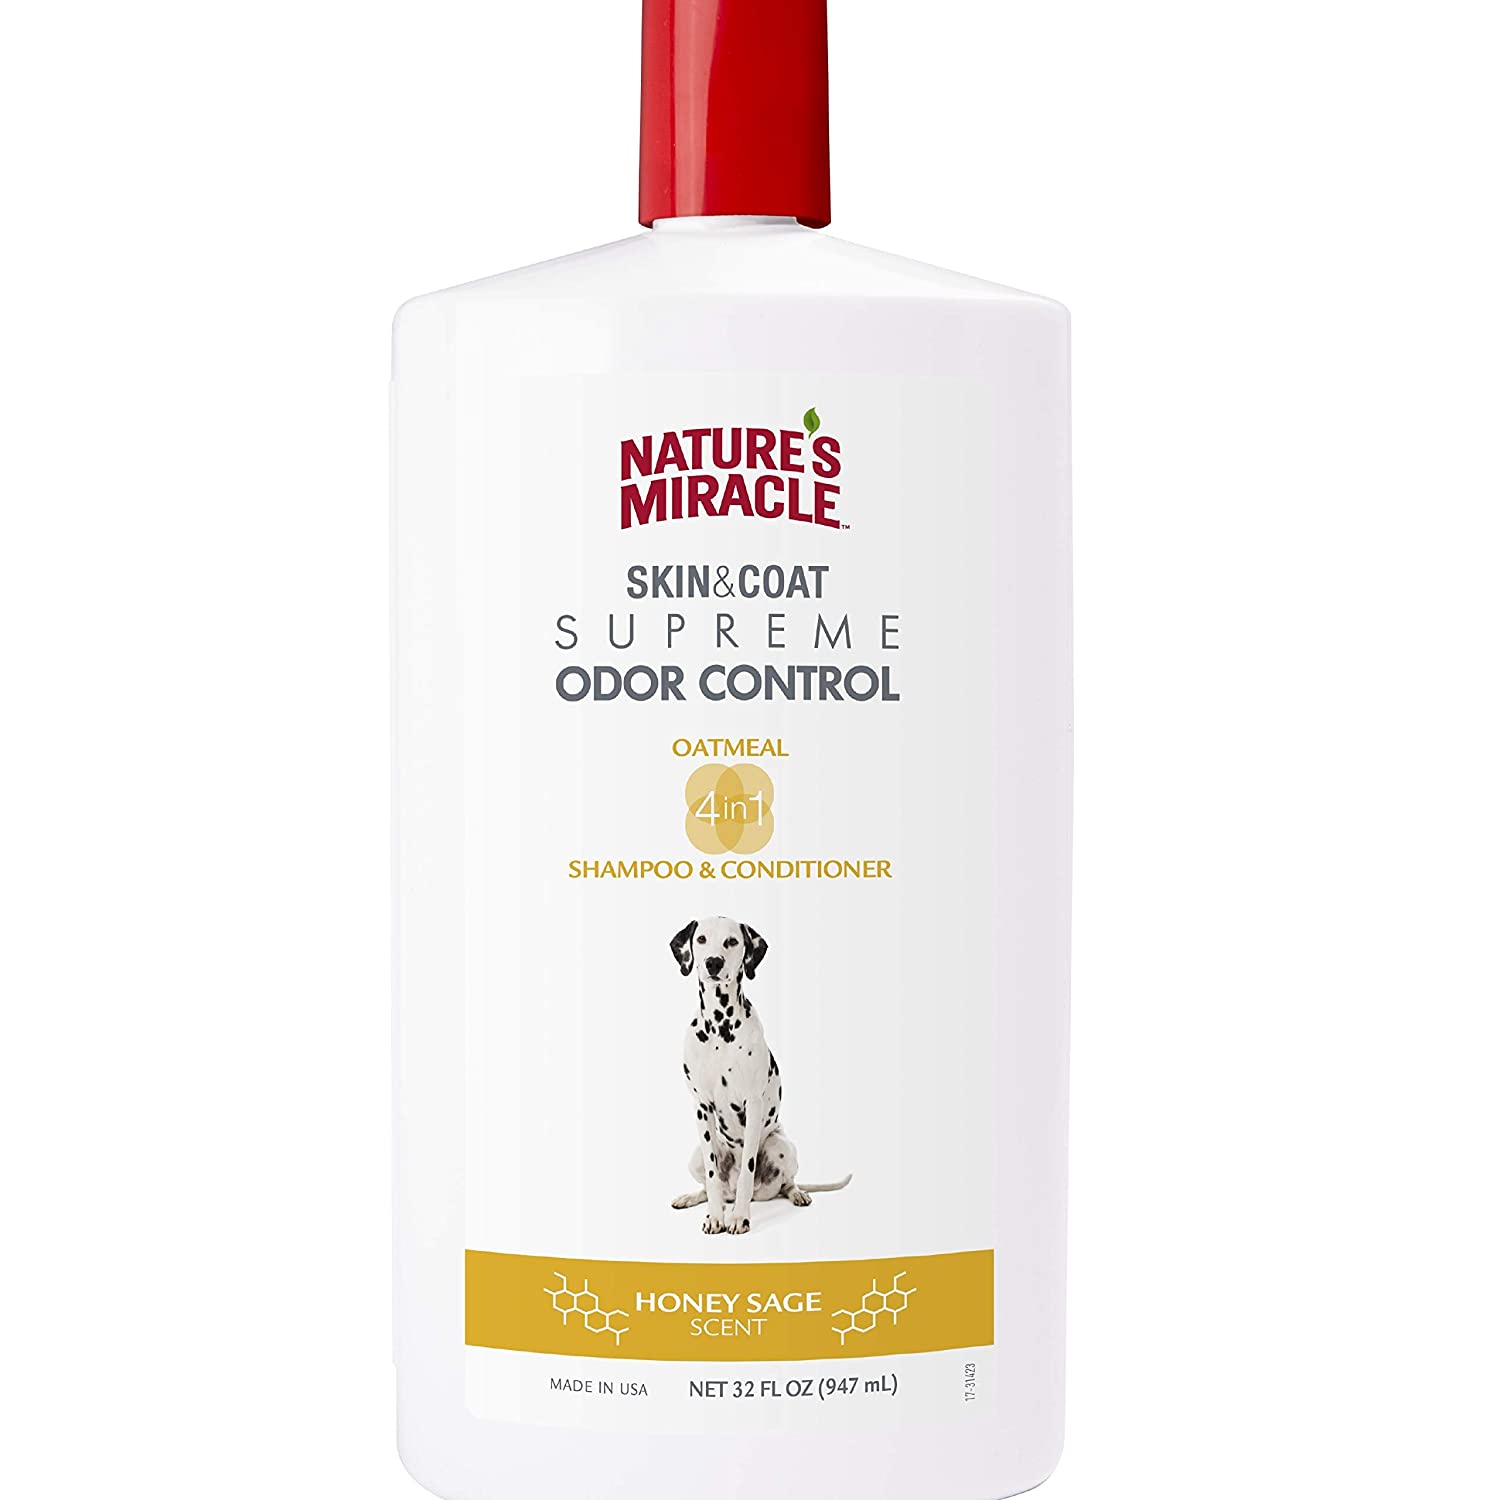 Nature's Miracle Supreme Odor Control Natural Oatmeal Dog Shampoo & Conditioner